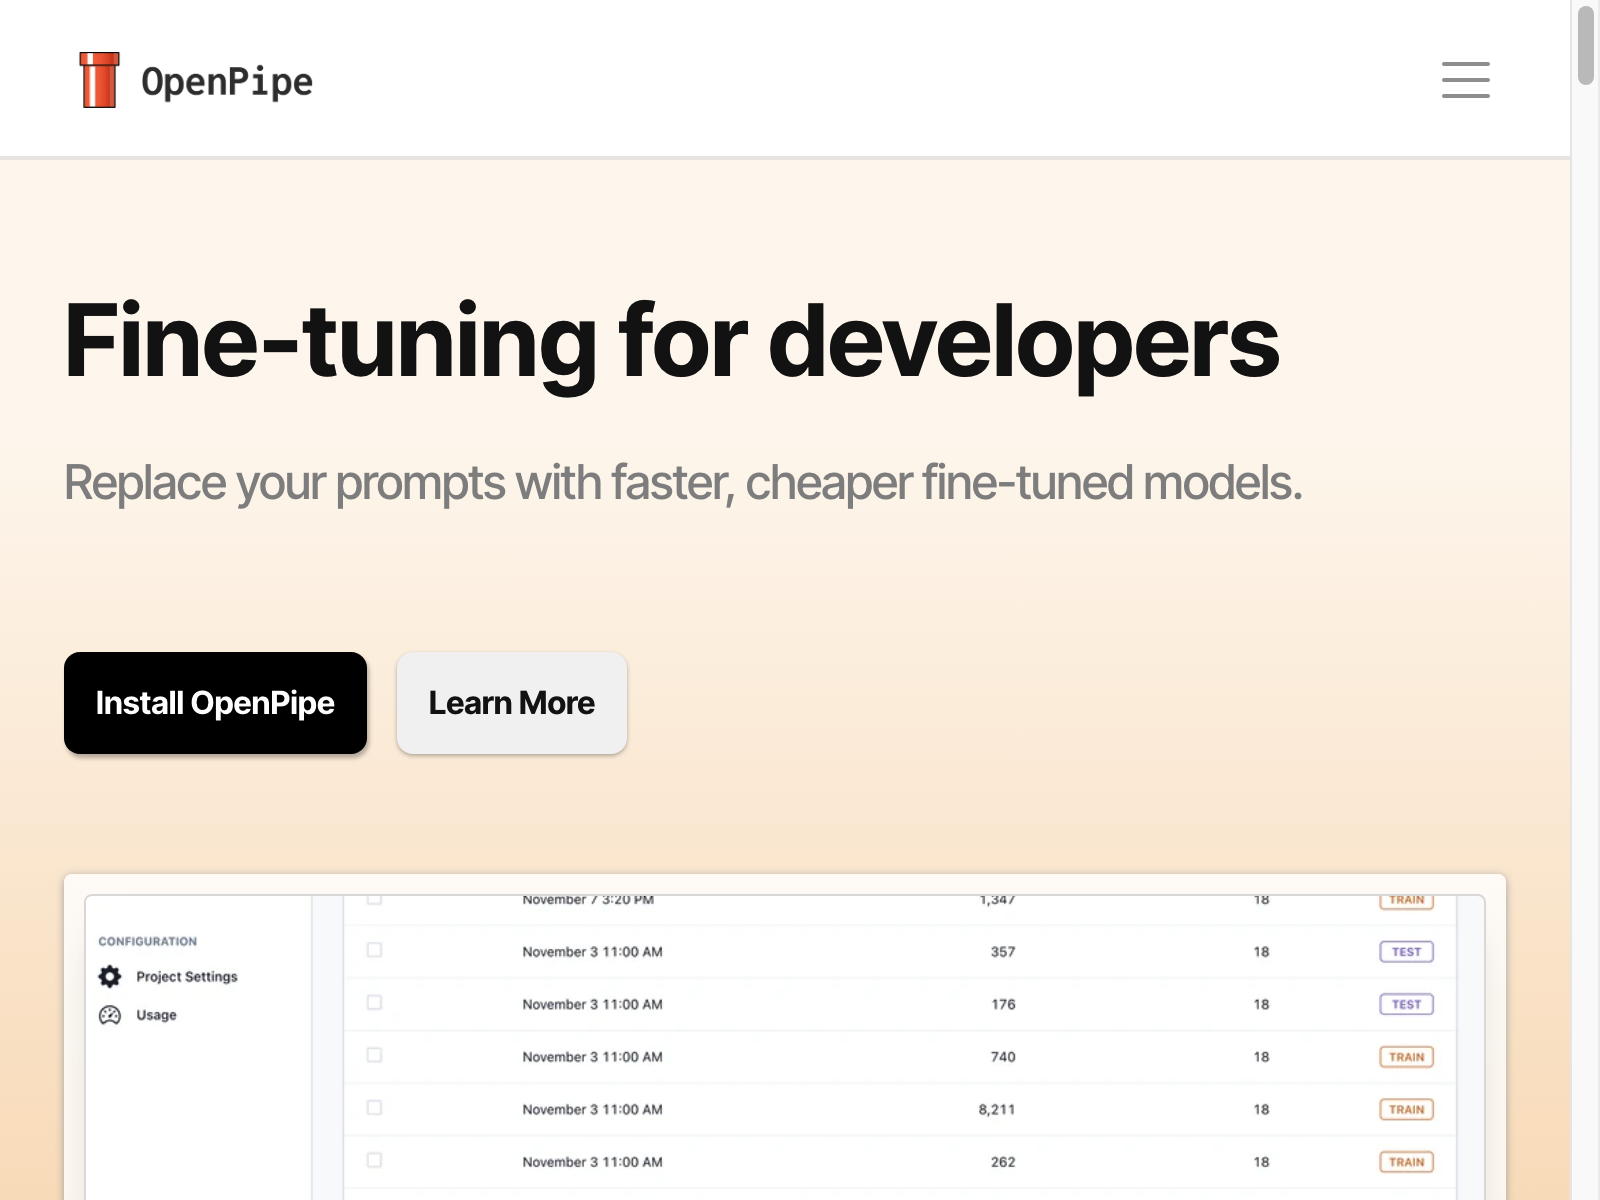 OpenPipe Review: Pros, Cons, Alternatives